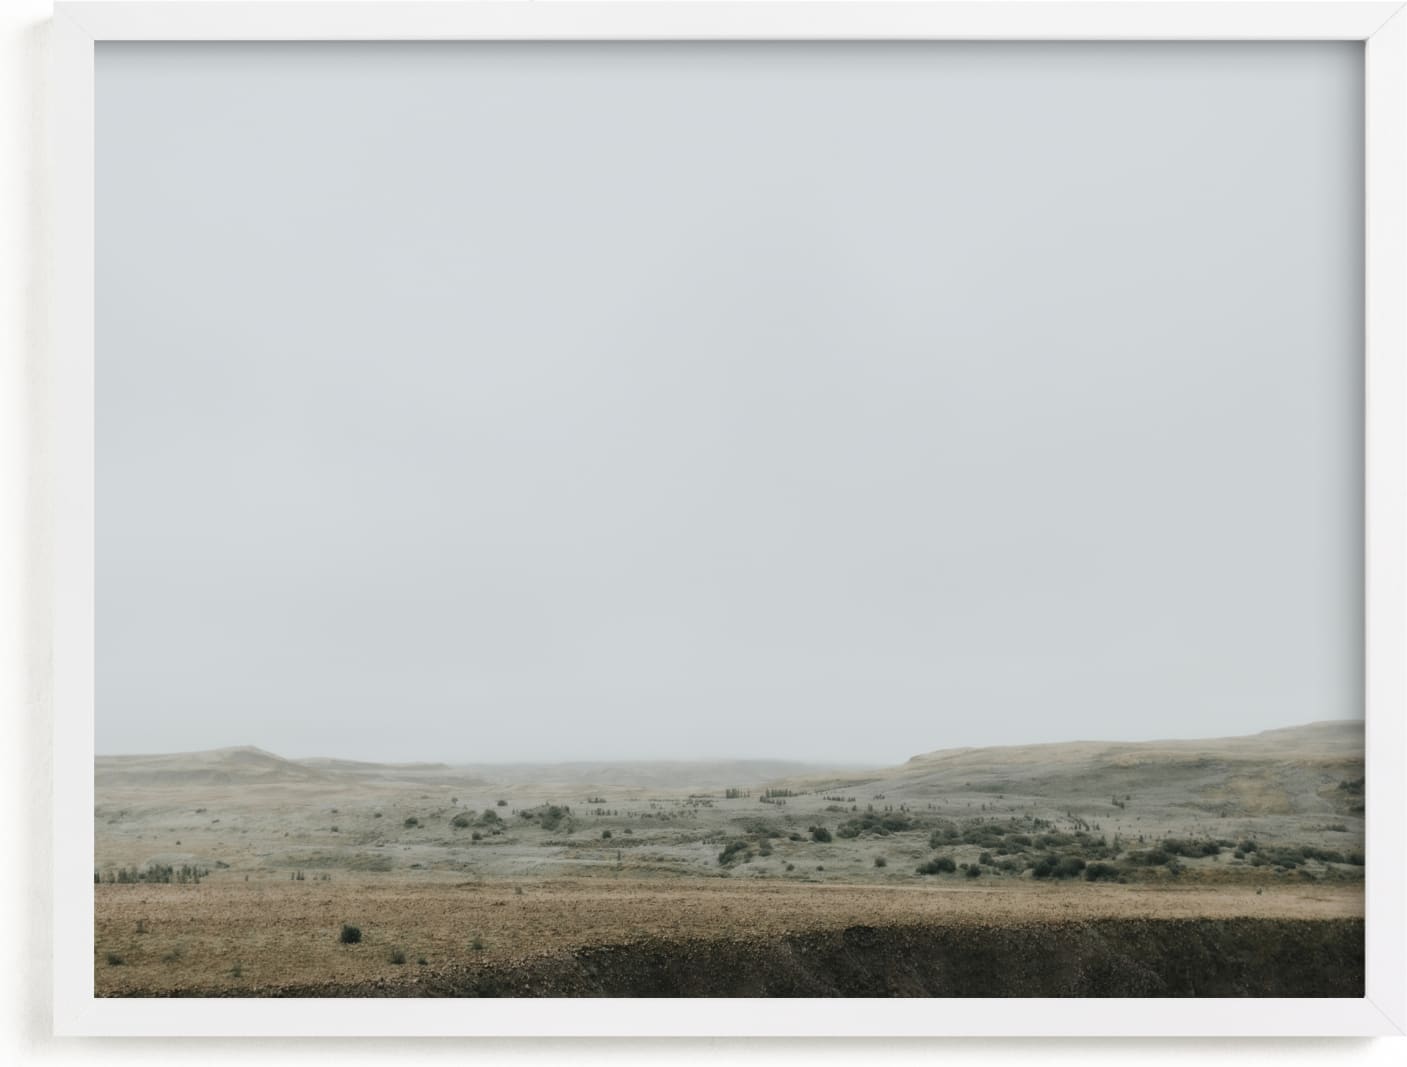 This is a grey art by Alicia Abla called Landscape under Fog.